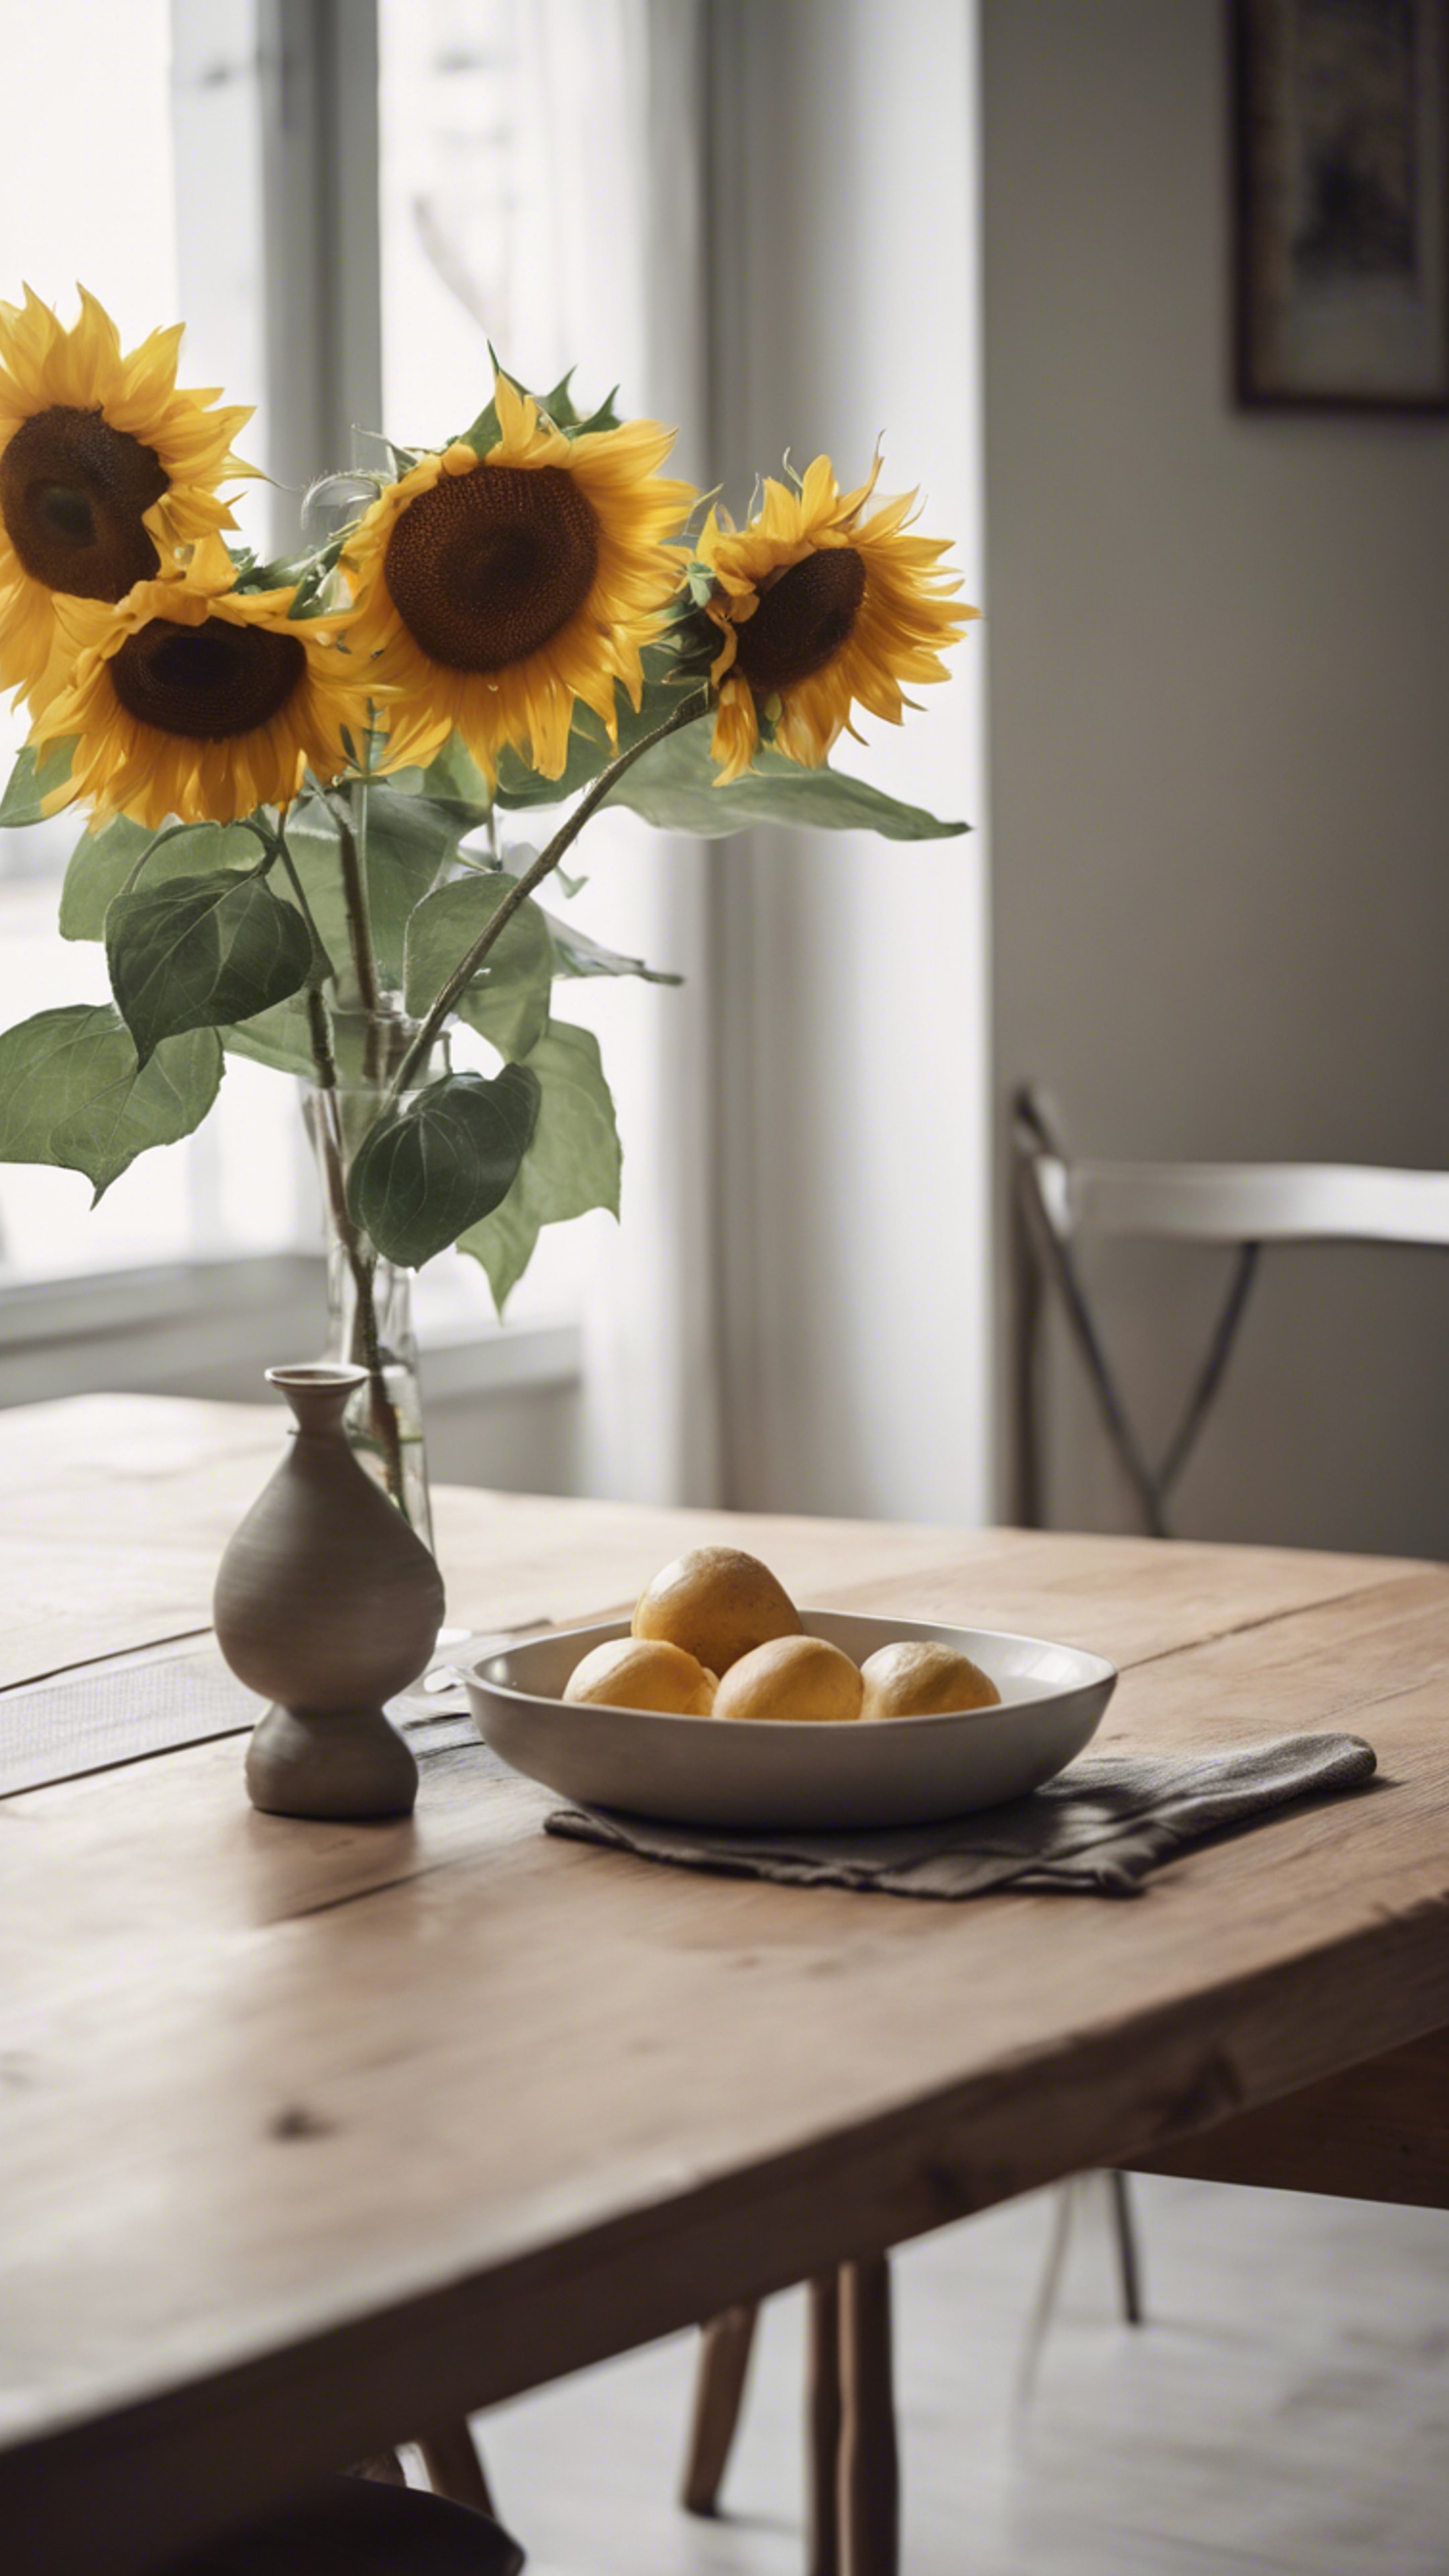 A minimalist dining area with a wooden table, set with simple china and a vase of sunflowers. Wallpaper[7db5290c1b5a4d25ba08]